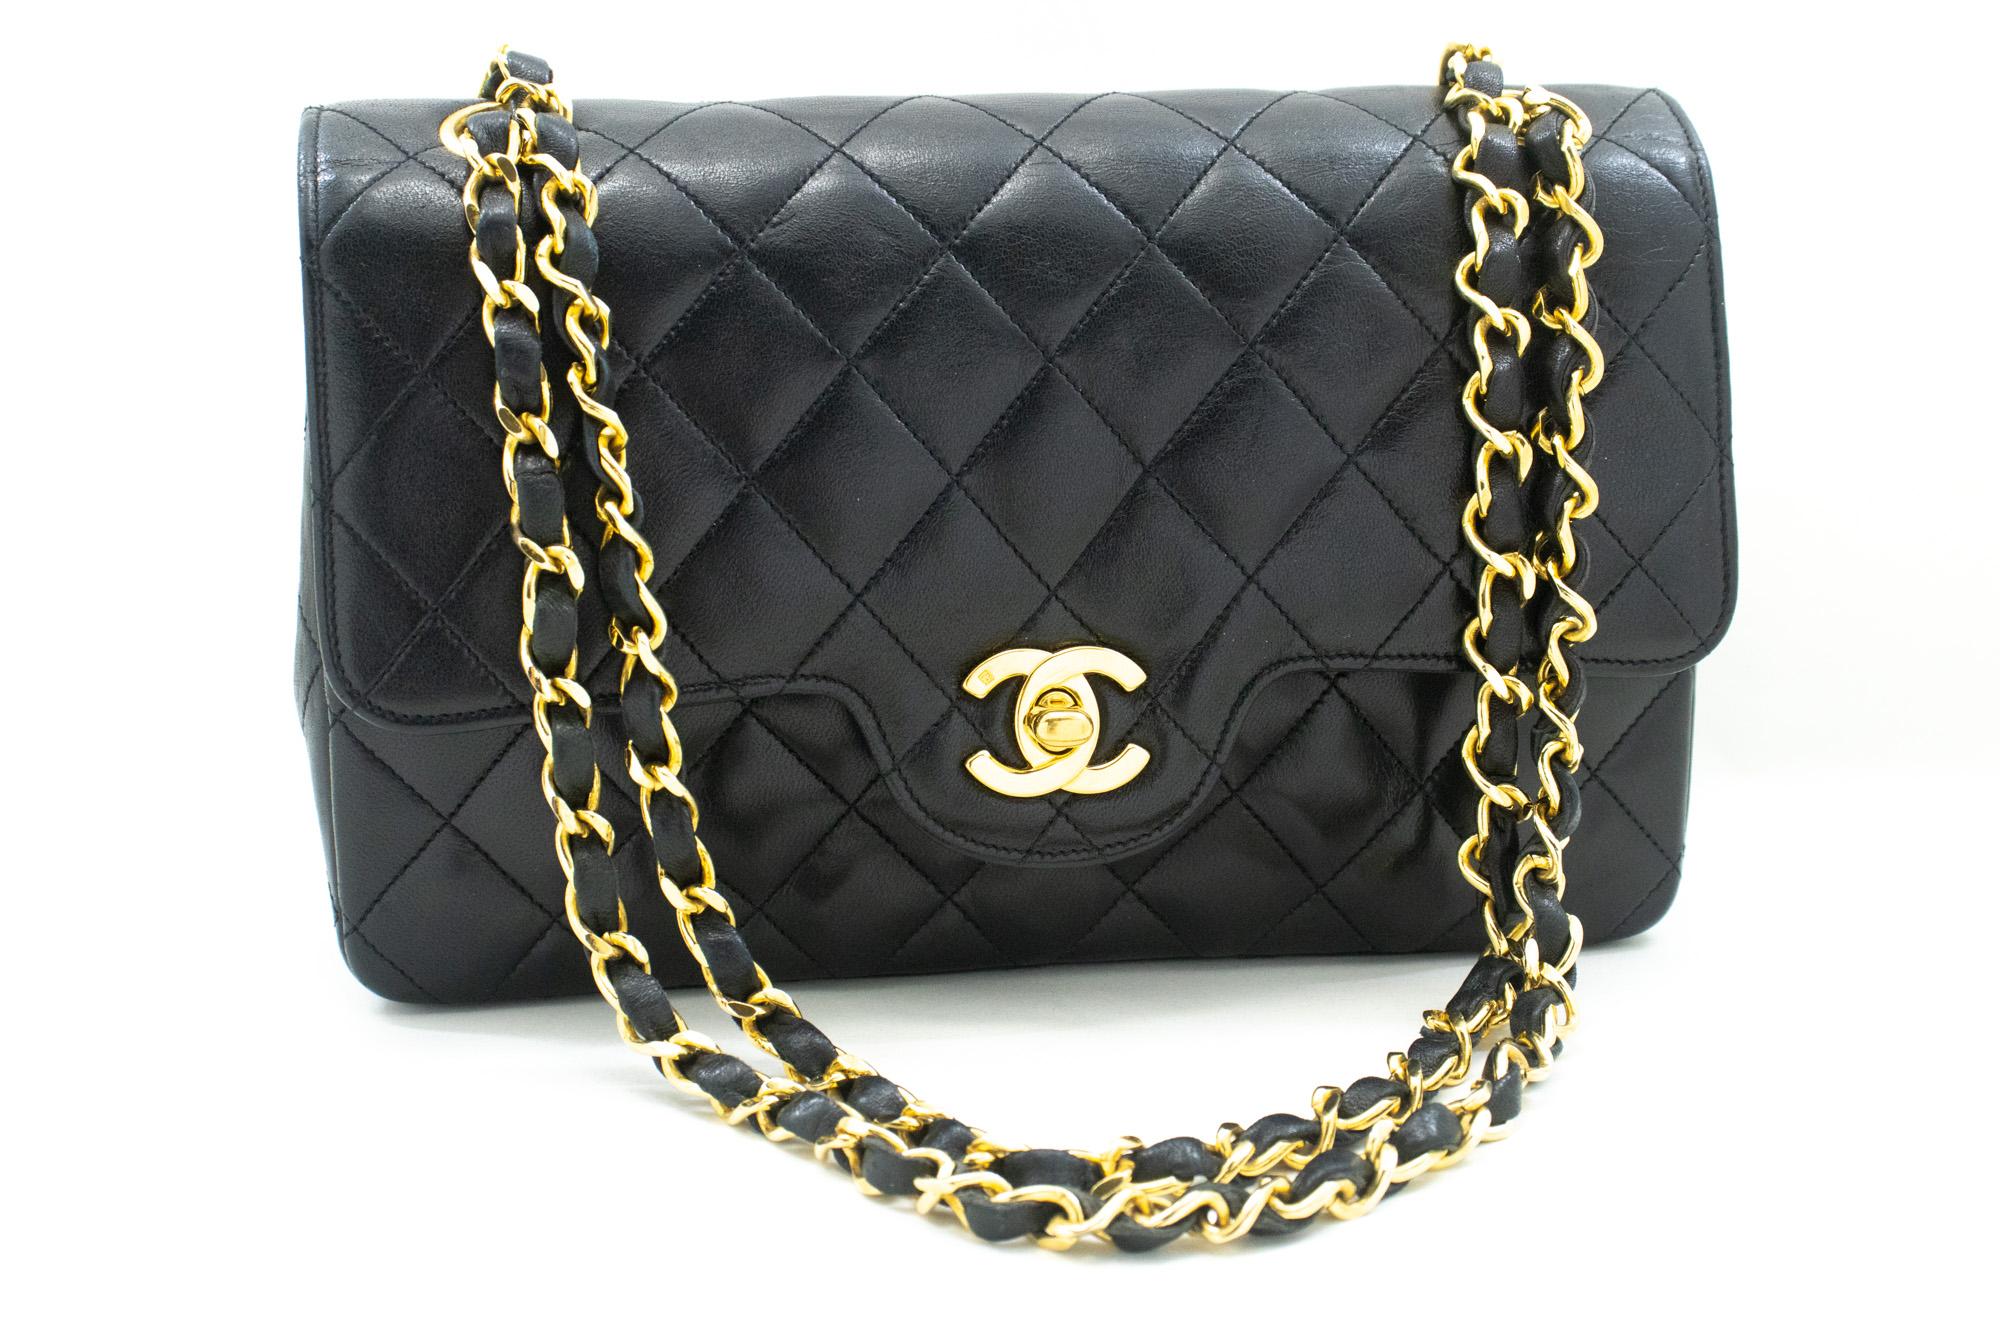 An authentic CHANEL Vintage Classic Double Flap Small Chain Shoulder Bag Black. The color is Black. The outside material is Leather. The pattern is Solid. This item is Vintage / Classic. The year of manufacture would be 1989-1991.
Conditions &